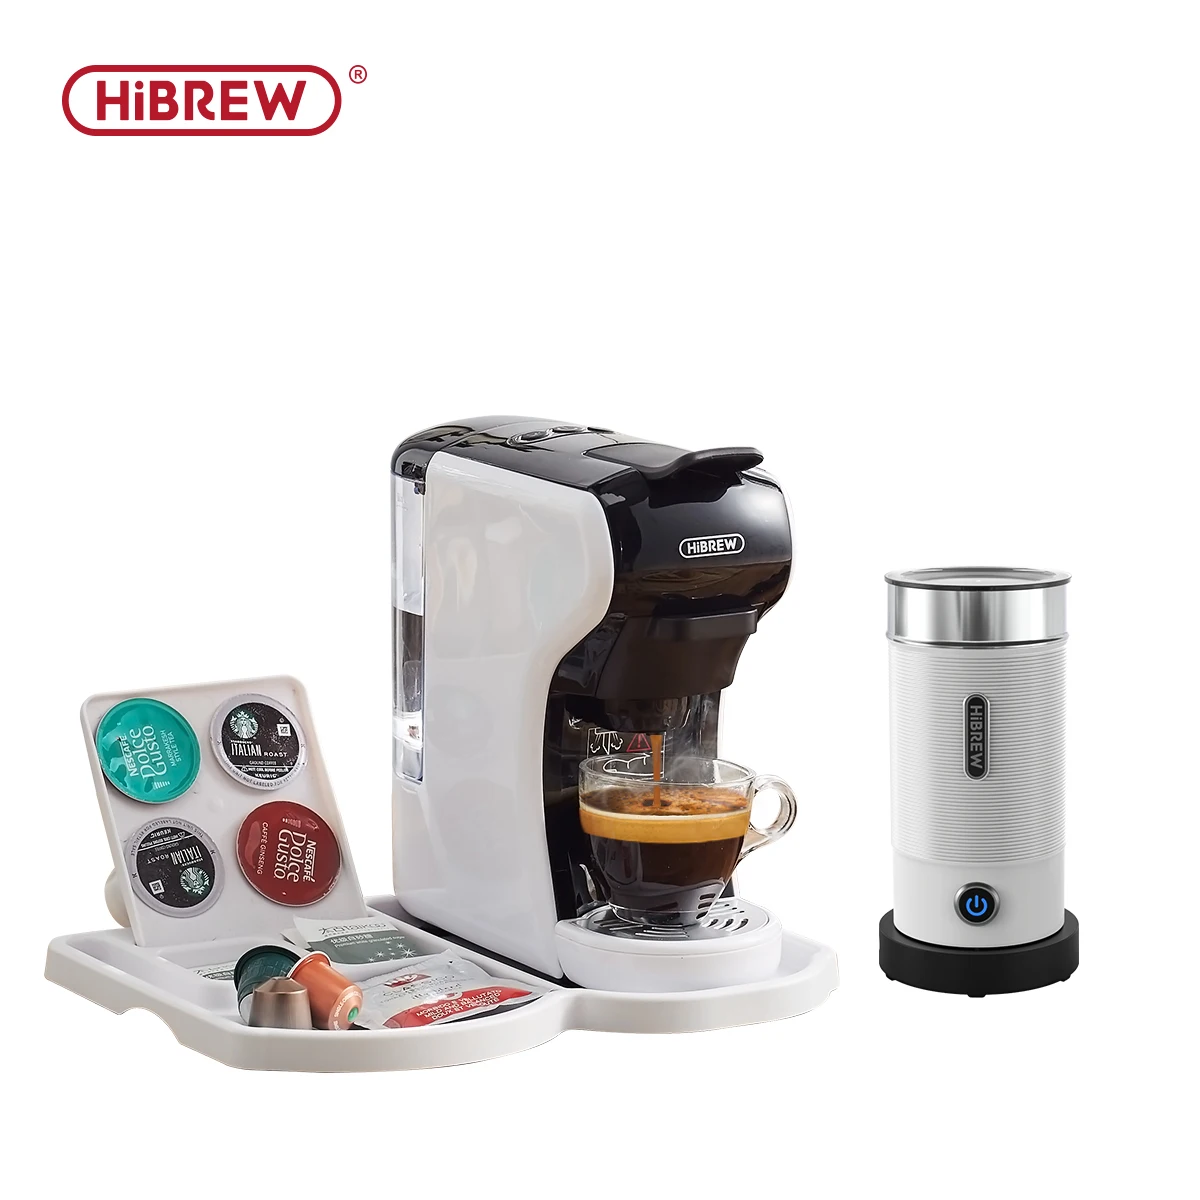 HiBREW 4 in 1 multiple Capsule Machine Full Automatic With Stainless Steel Hot & Cold Milk Foaming Machine & Plastic Tray se